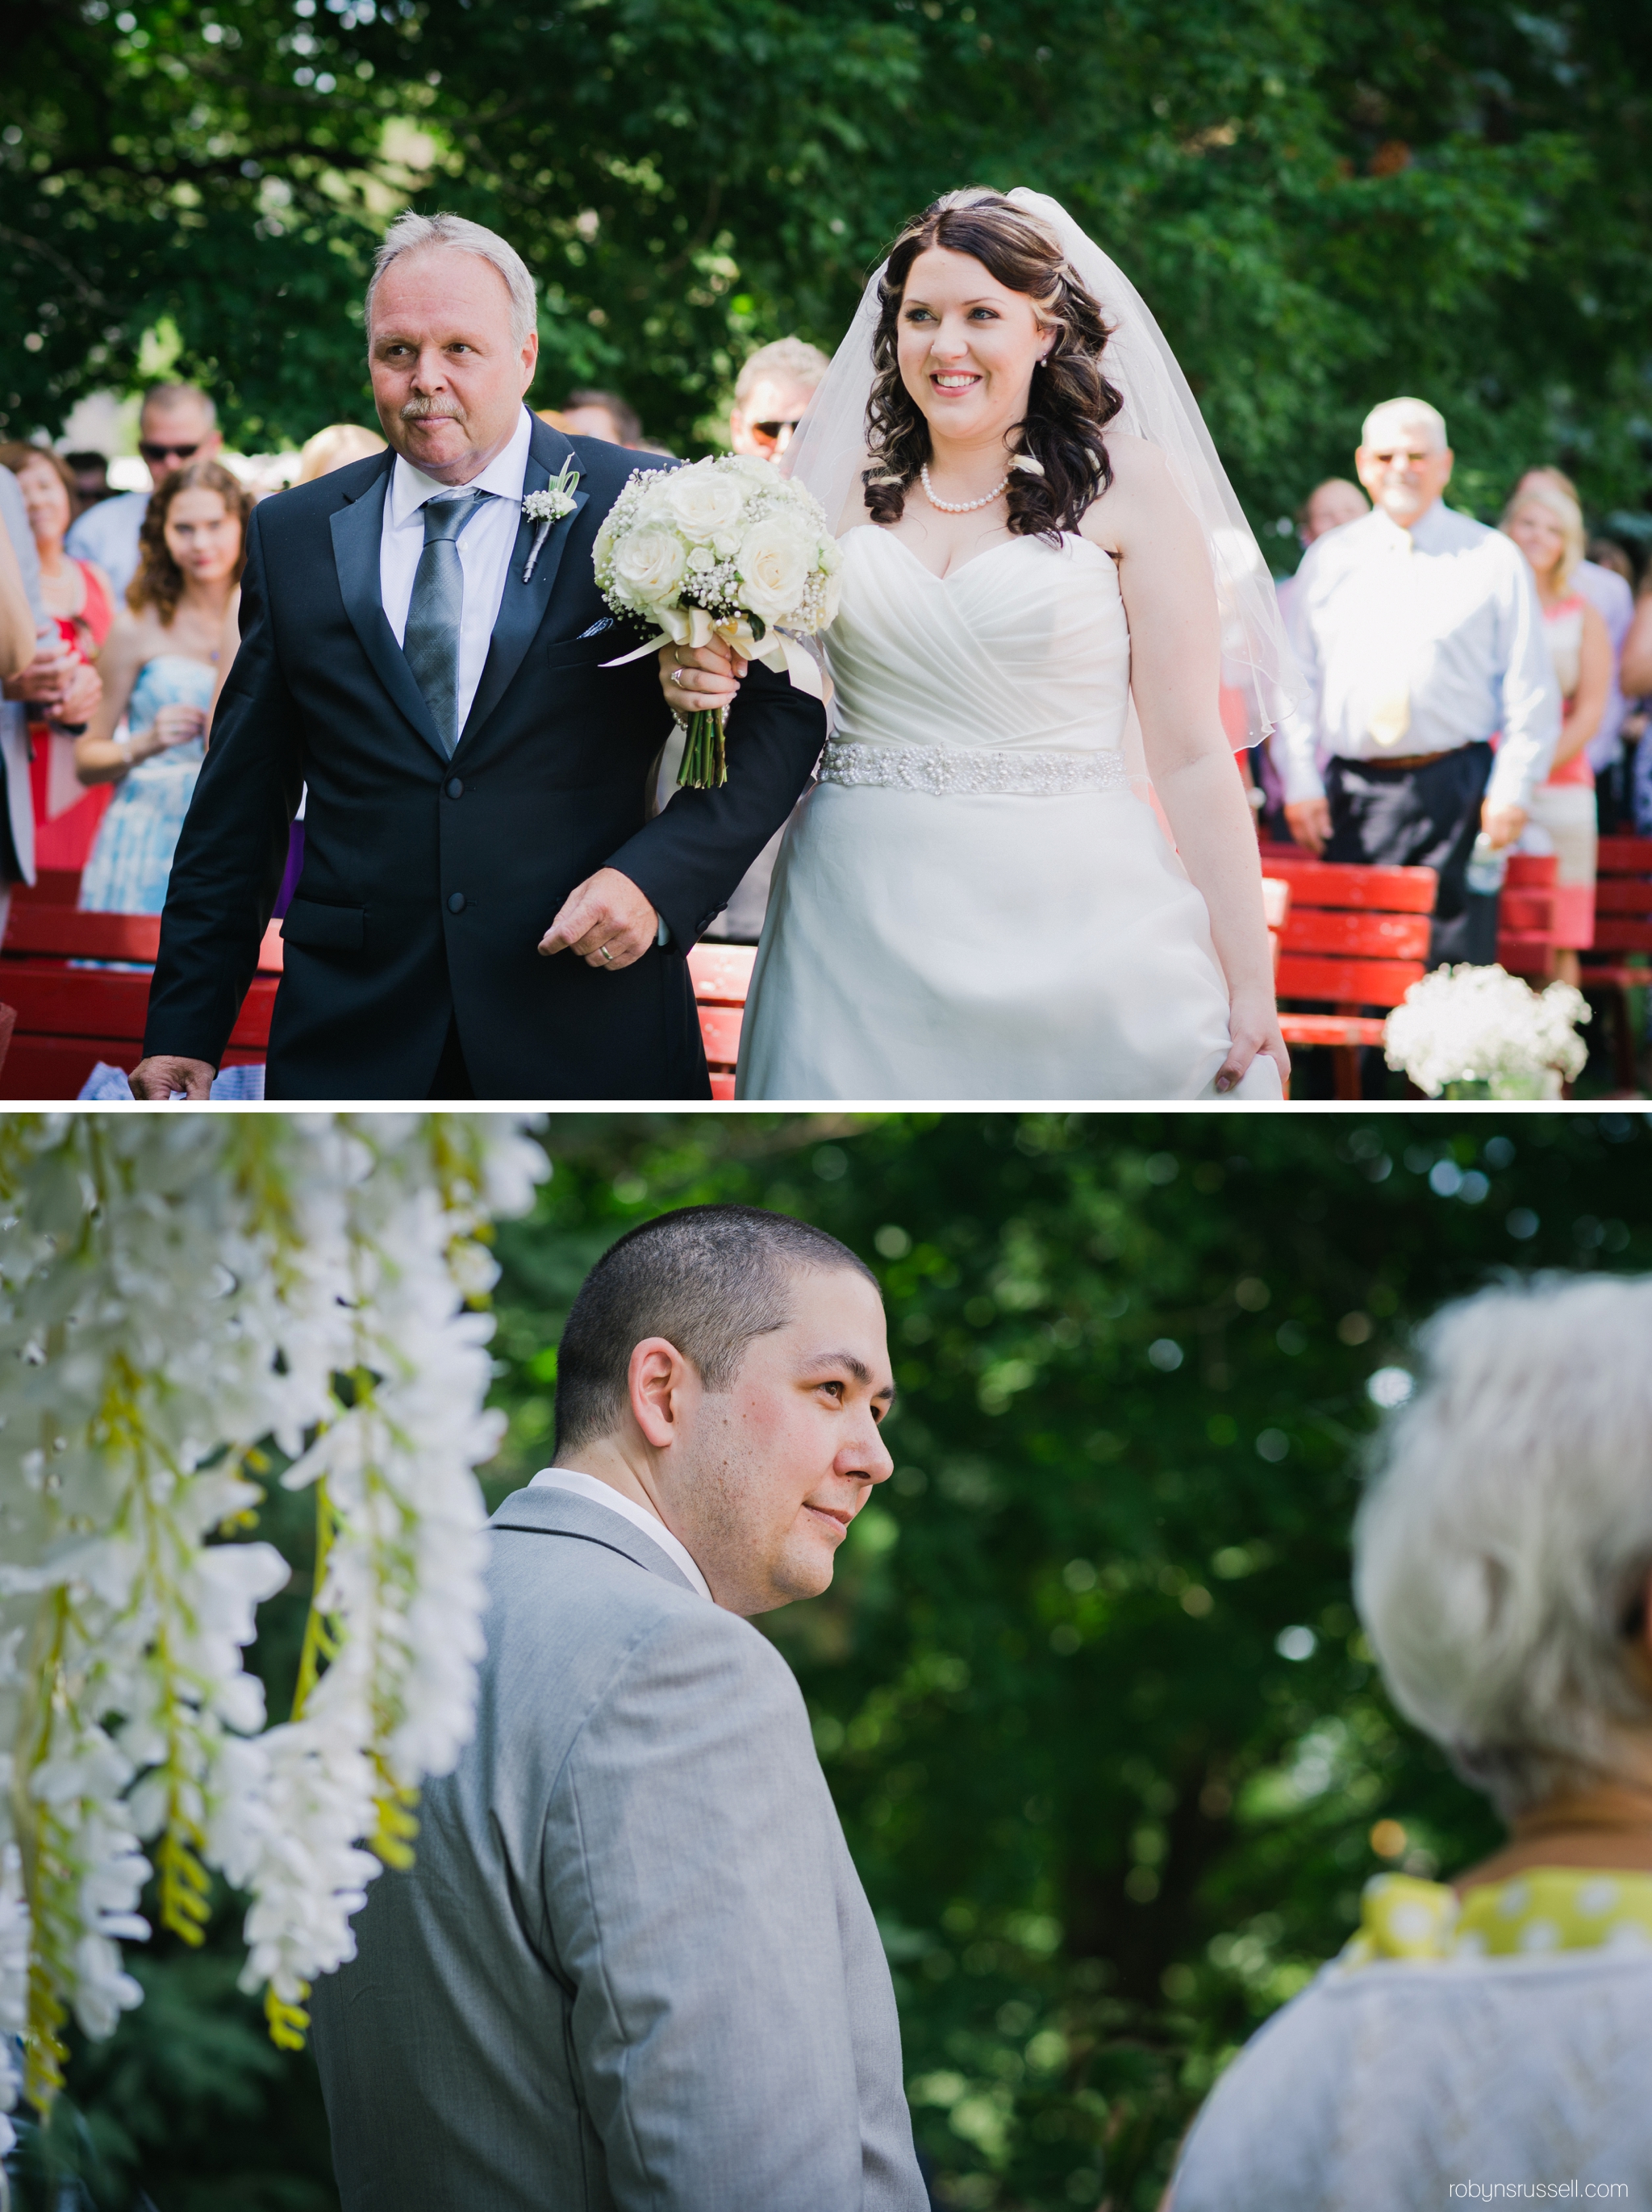 19-bride-with-dad-while-groom-looks-on.jpg